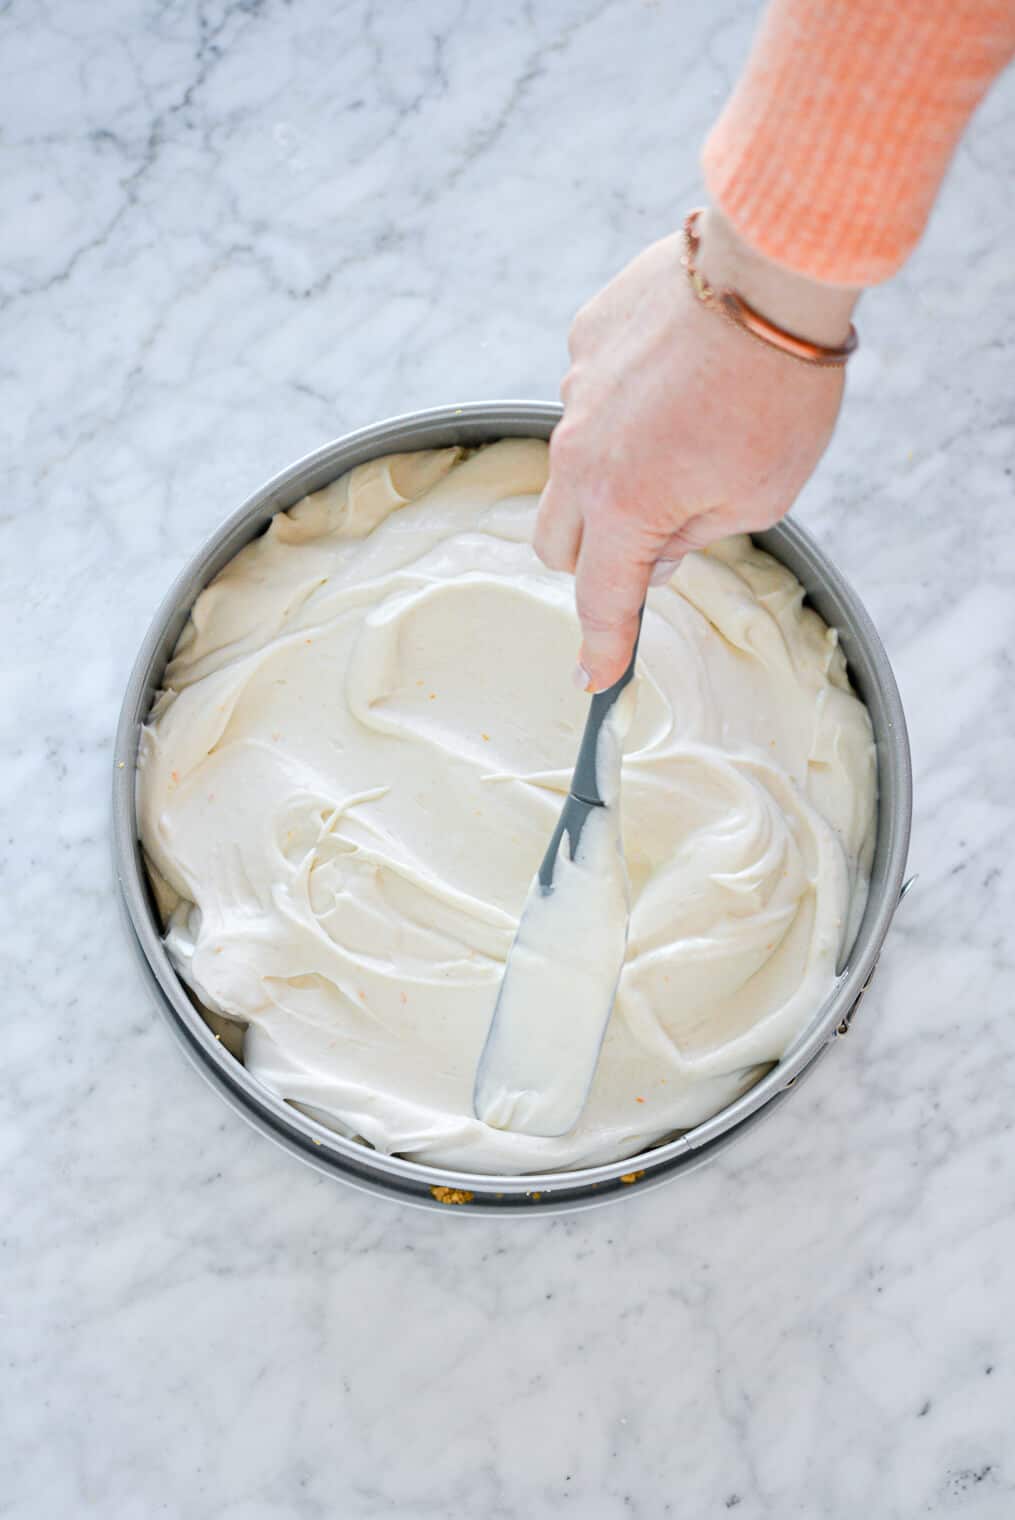 Cheesecake being spread with a spatula in a springform pan.